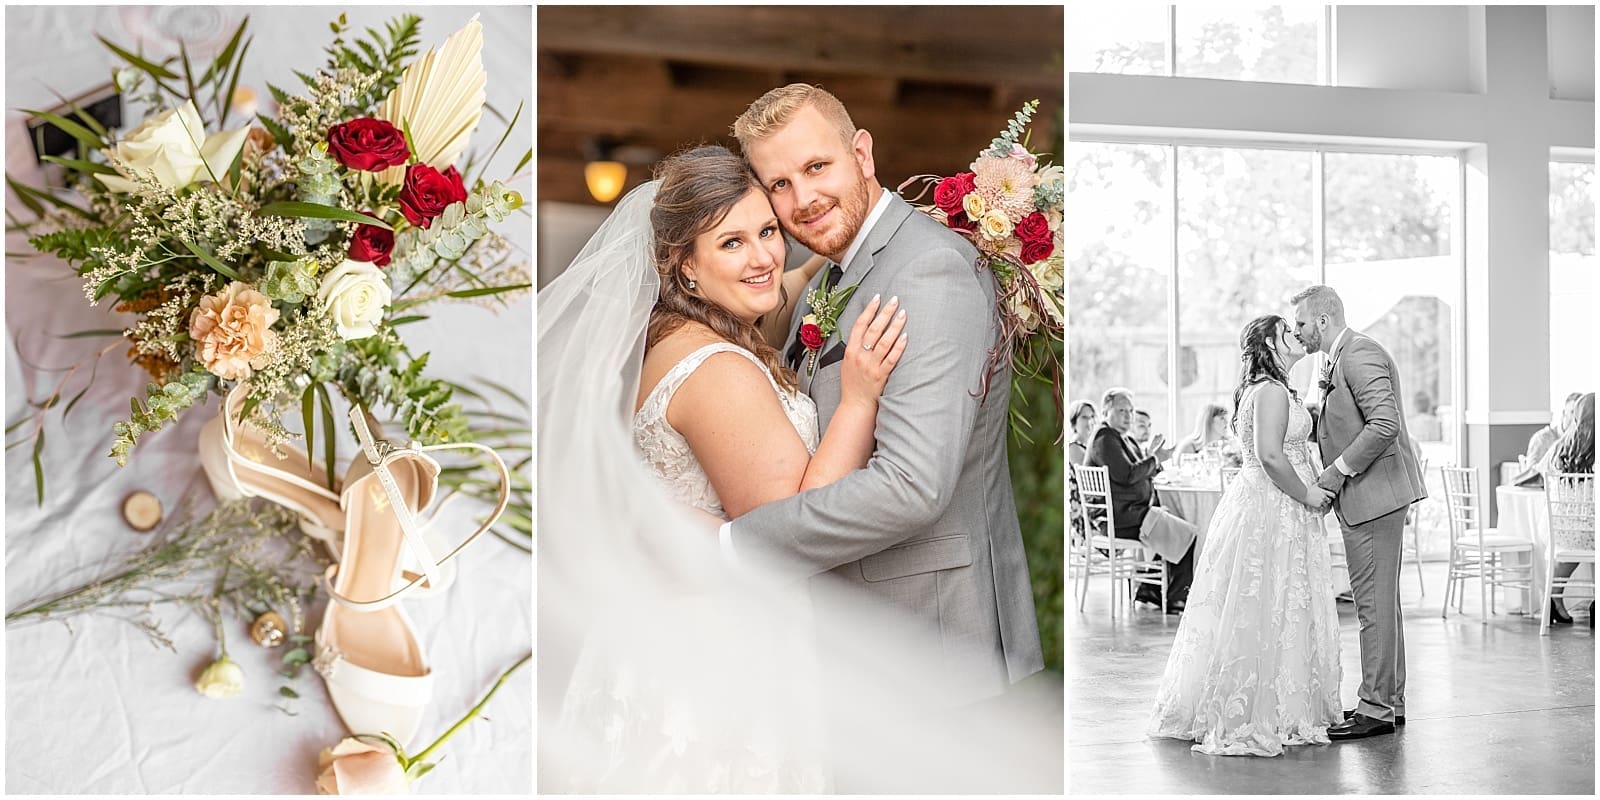 wedding photography, wedding bouquet, wedding details, deliciously ordinary, reception, first dance, veil swoop, garden grove, carbondale, southern Illinois wedding